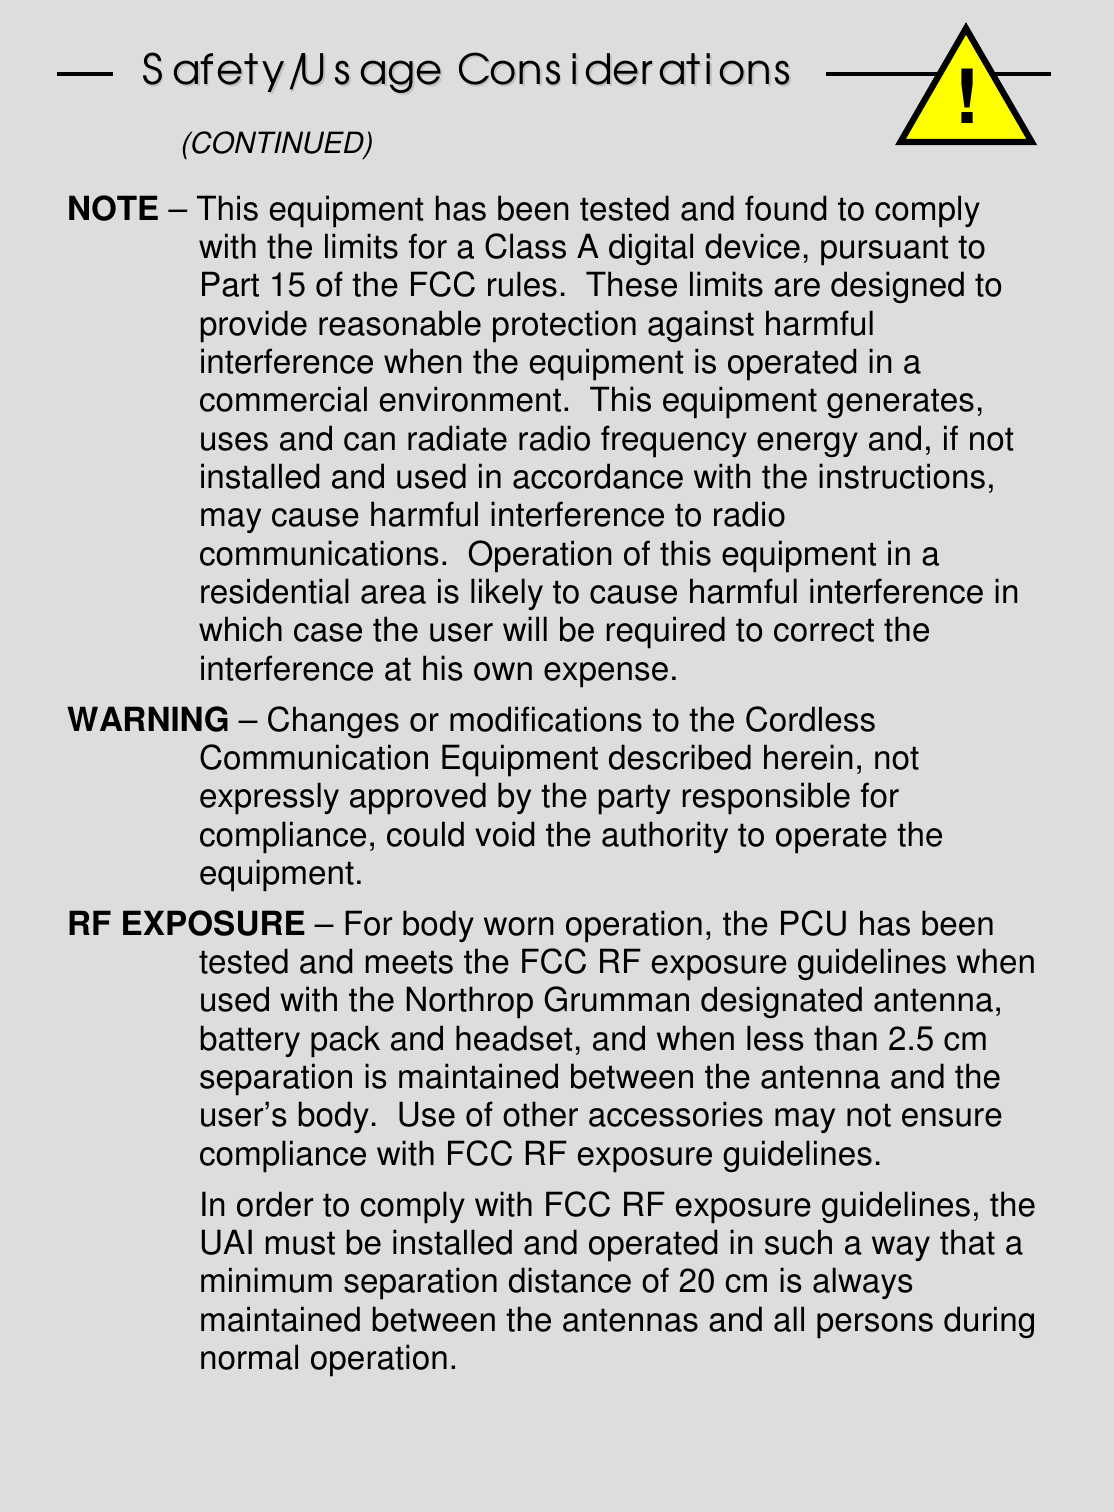 SSaaffeettyy//UUssaaggee  CCoonnssiiddeerraattiioonnss(CONTINUED)NOTE – This equipment has been tested and found to complywith the limits for a Class A digital device, pursuant toPart 15 of the FCC rules.  These limits are designed toprovide reasonable protection against harmfulinterference when the equipment is operated in acommercial environment.  This equipment generates,uses and can radiate radio frequency energy and, if notinstalled and used in accordance with the instructions,may cause harmful interference to radiocommunications.  Operation of this equipment in aresidential area is likely to cause harmful interference inwhich case the user will be required to correct theinterference at his own expense.WARNING – Changes or modifications to the CordlessCommunication Equipment described herein, notexpressly approved by the party responsible forcompliance, could void the authority to operate theequipment.RF EXPOSURE – For body worn operation, the PCU has beentested and meets the FCC RF exposure guidelines whenused with the Northrop Grumman designated antenna,battery pack and headset, and when less than 2.5 cmseparation is maintained between the antenna and theuser’s body.  Use of other accessories may not ensurecompliance with FCC RF exposure guidelines.In order to comply with FCC RF exposure guidelines, theUAI must be installed and operated in such a way that aminimum separation distance of 20 cm is alwaysmaintained between the antennas and all persons duringnormal operation.!